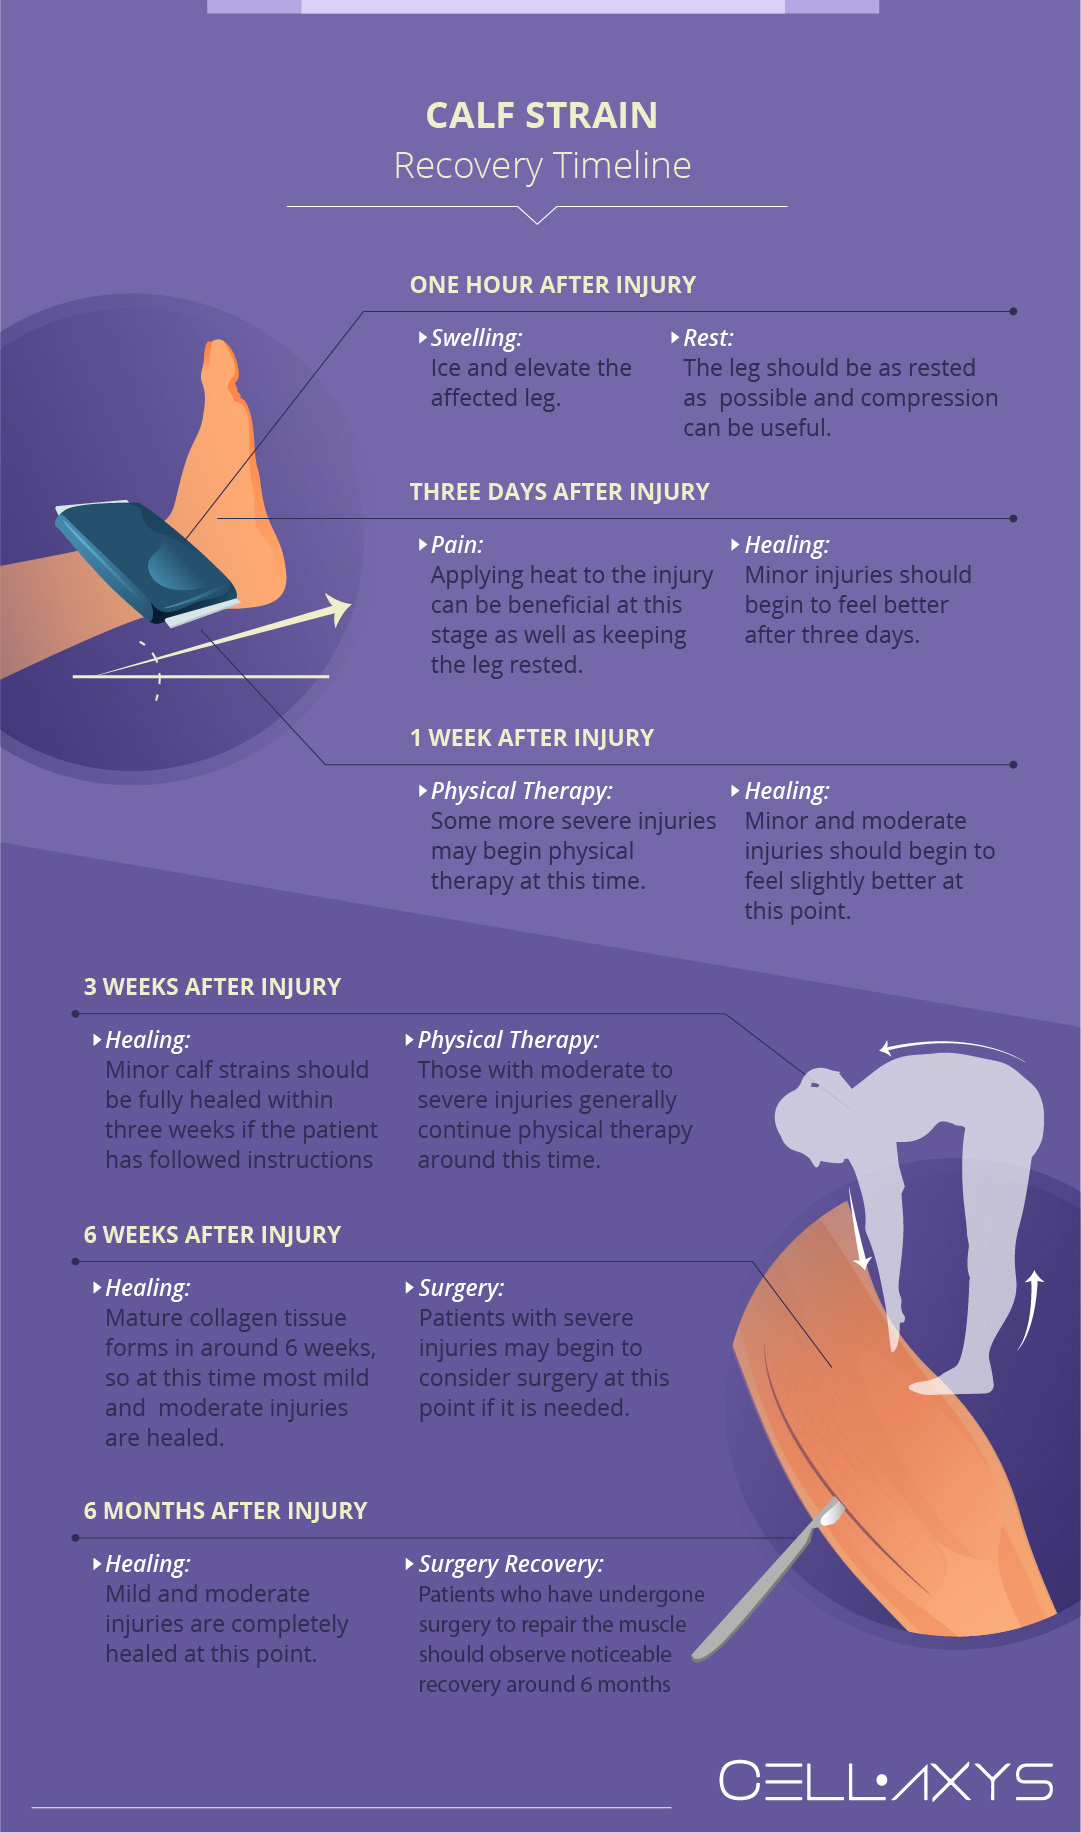 Calf Strain Recovery Timeline